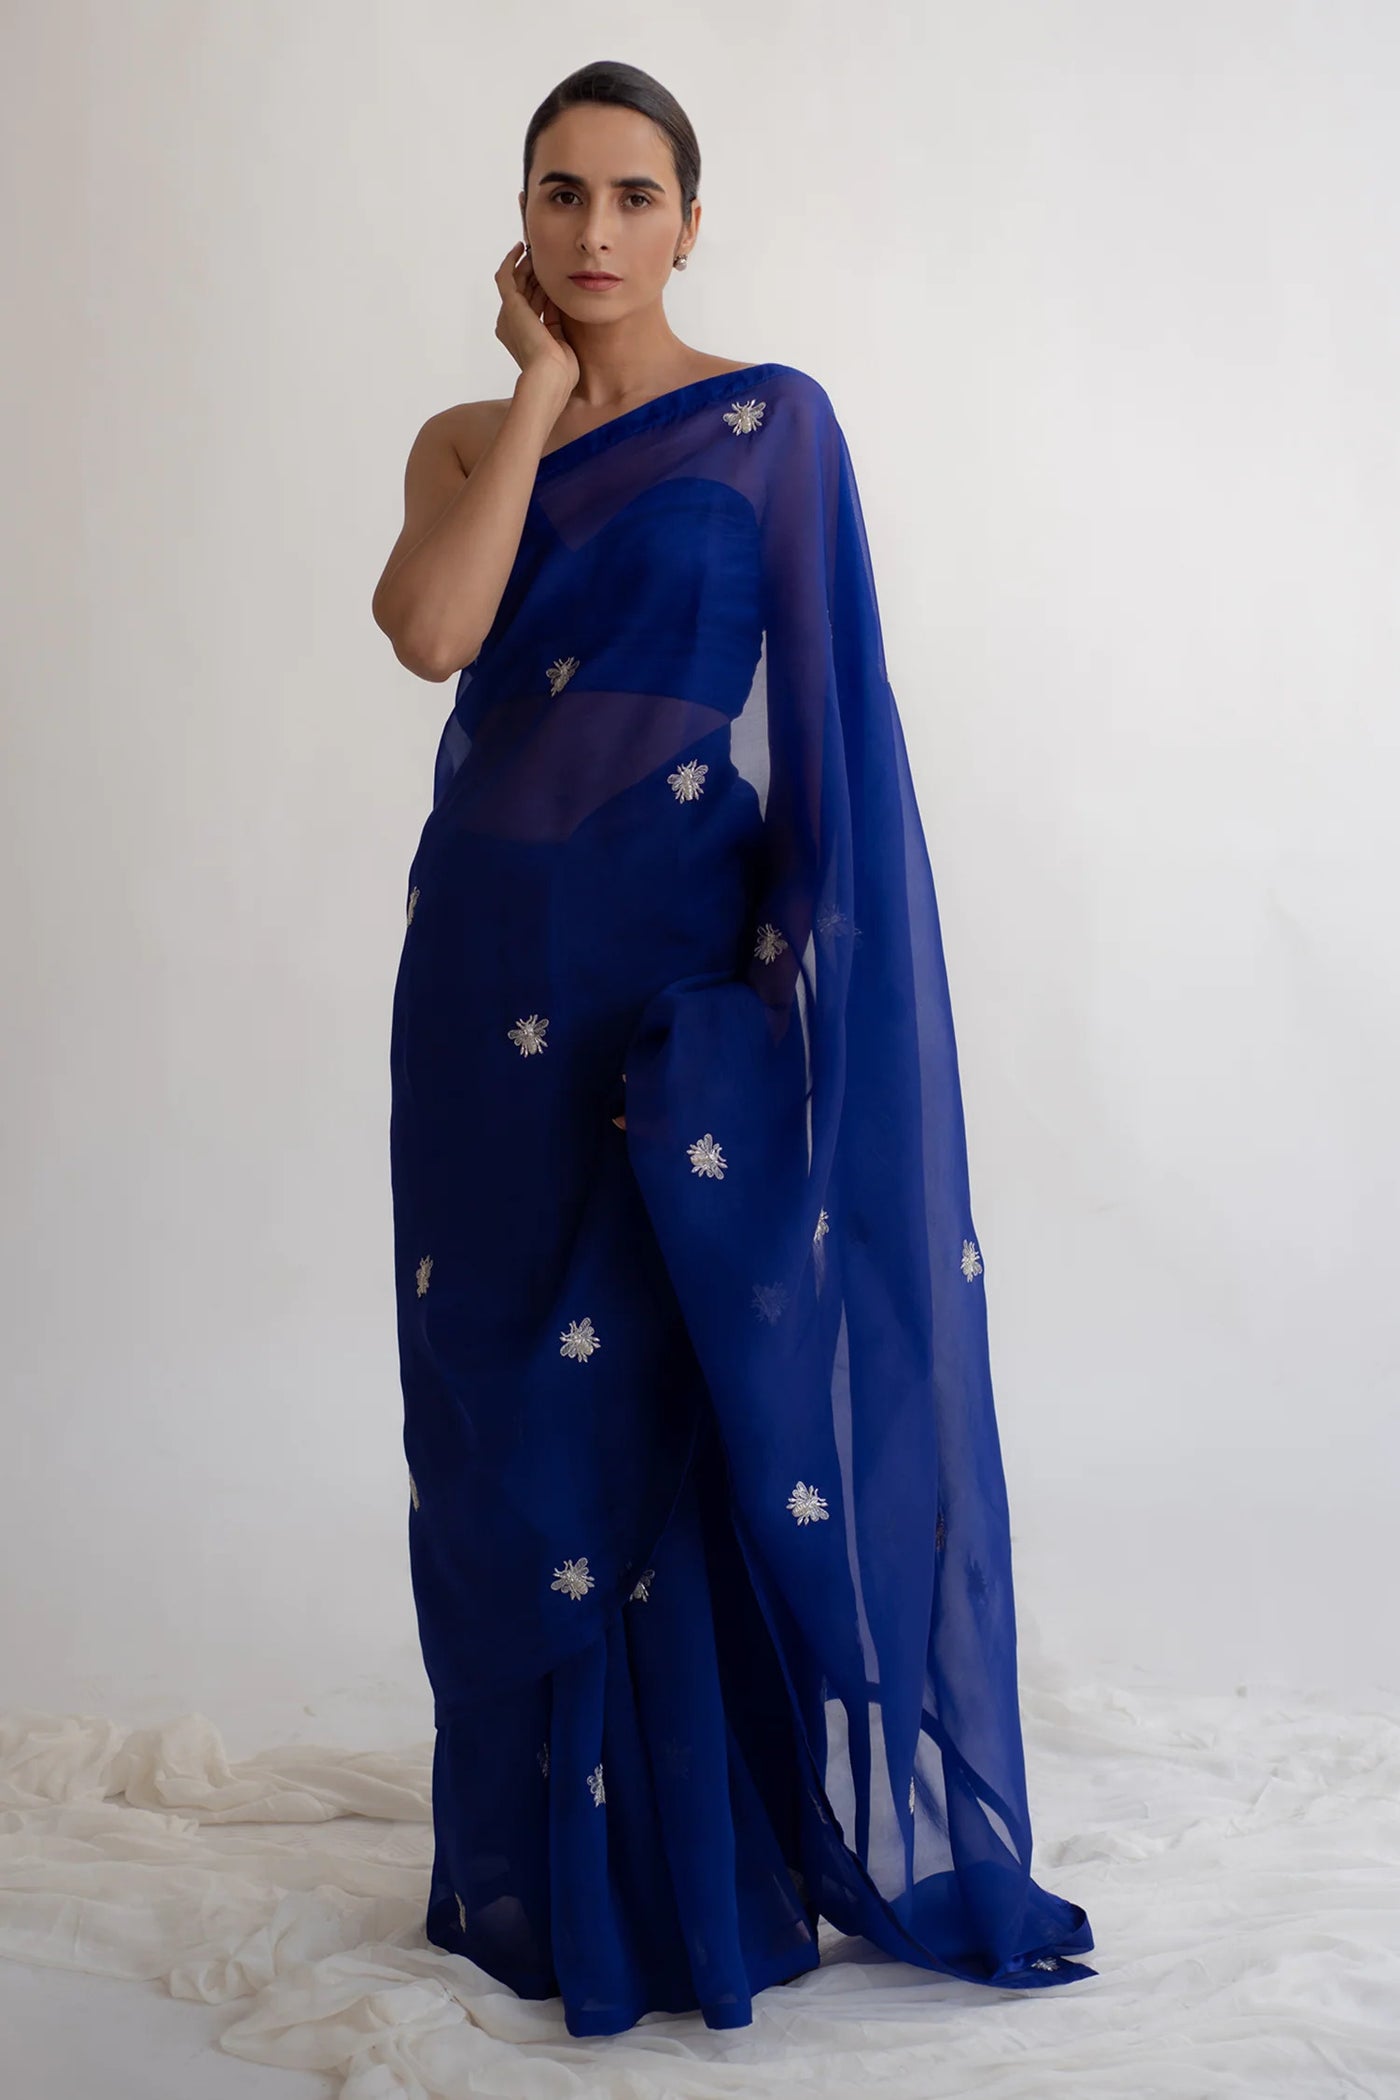 Bee Zardosi Saree - Royal Blue- Best Indian Clothing in Denver, CO, and Aurora, CO- India Fashion X